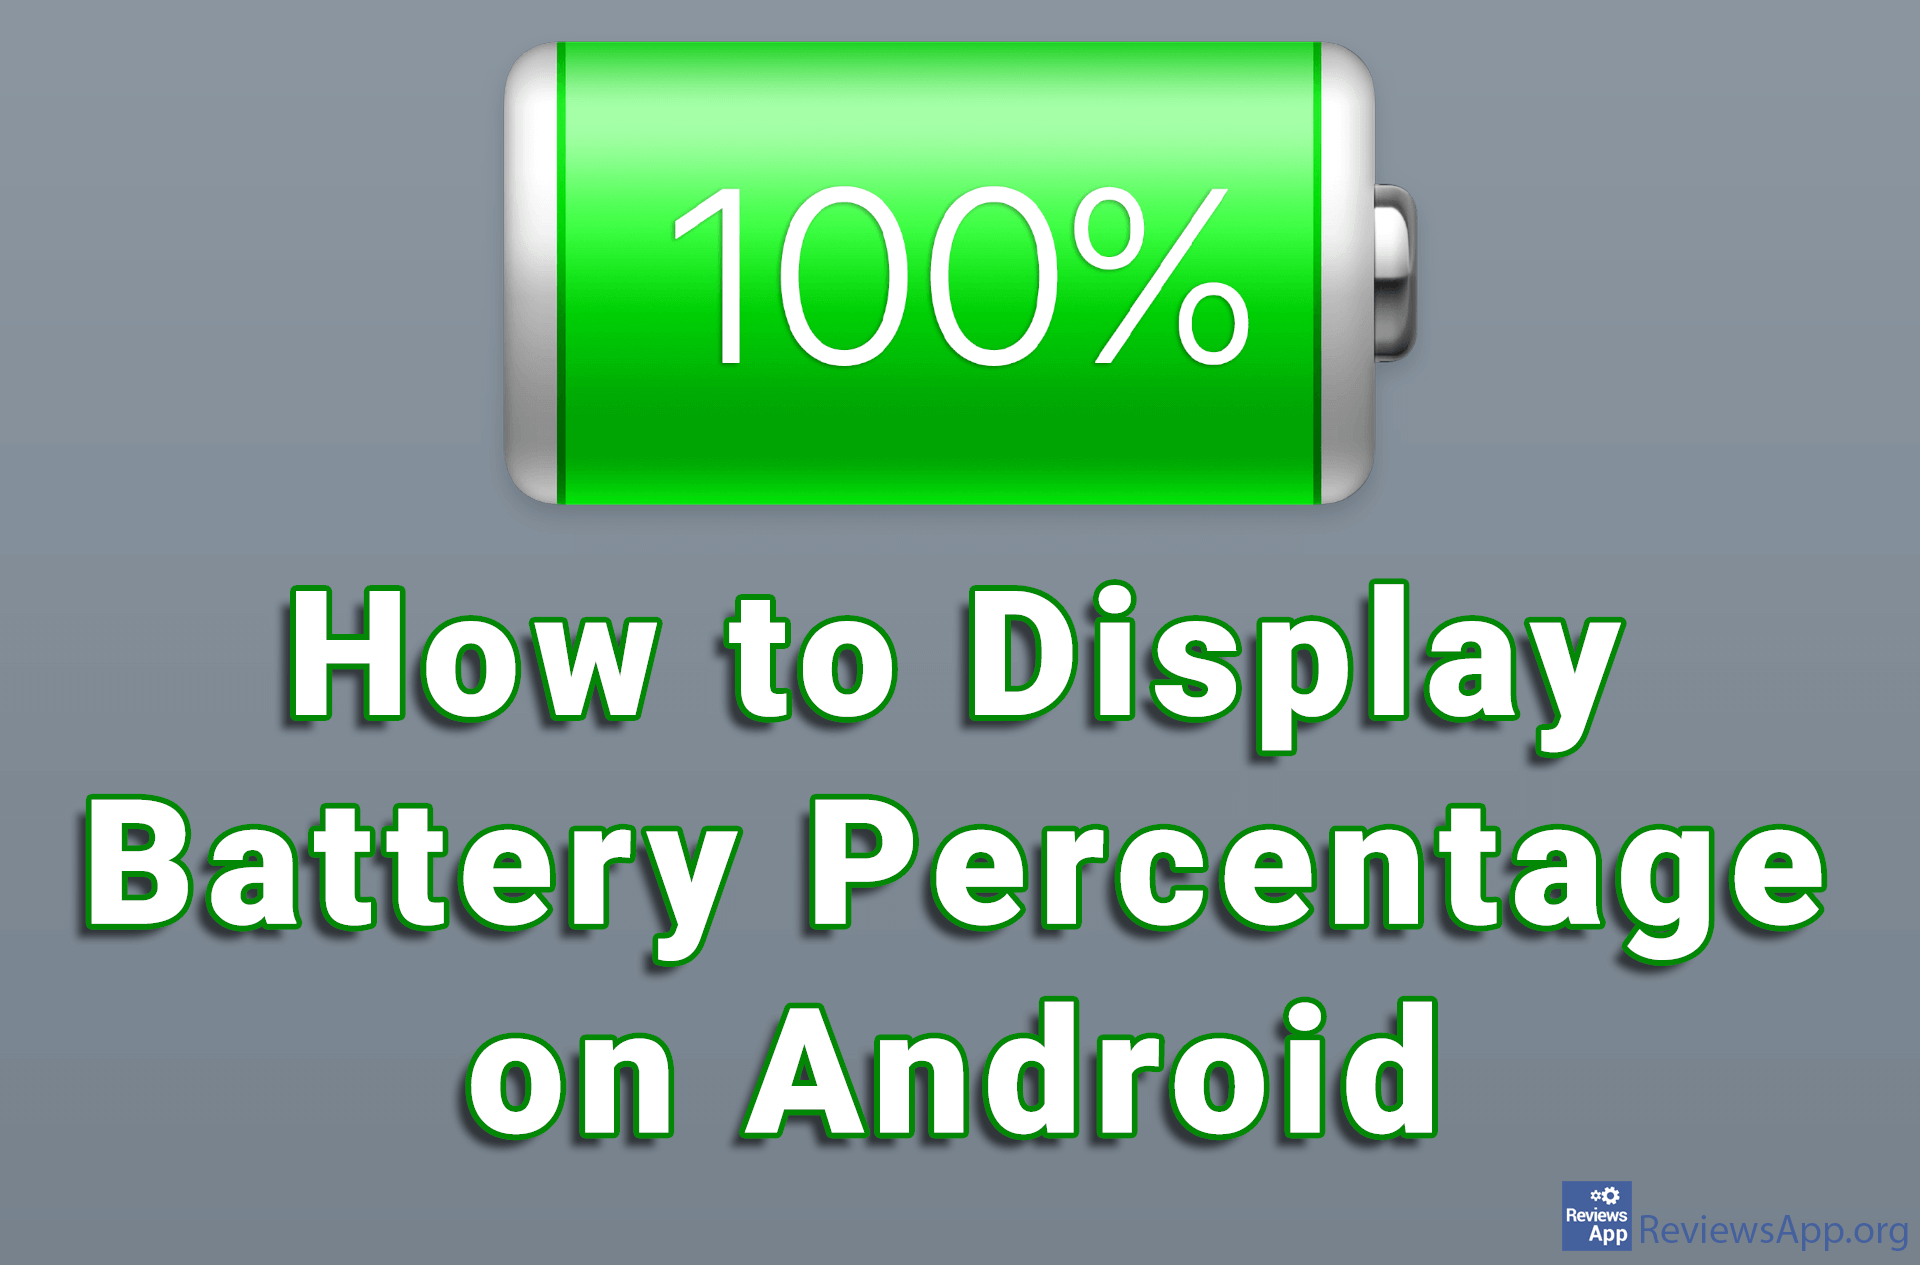 How to Display Battery Percentage on Android